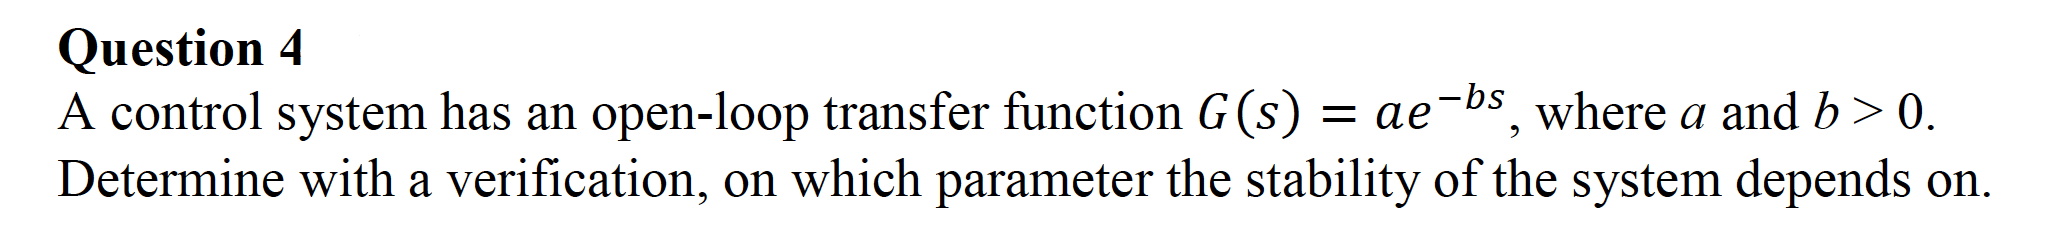 A control system has an open-loop transfer function G (s) = ae-bs, where a and b> 0.
Determine with a verification, on which parameter the stability of the system depends on.
